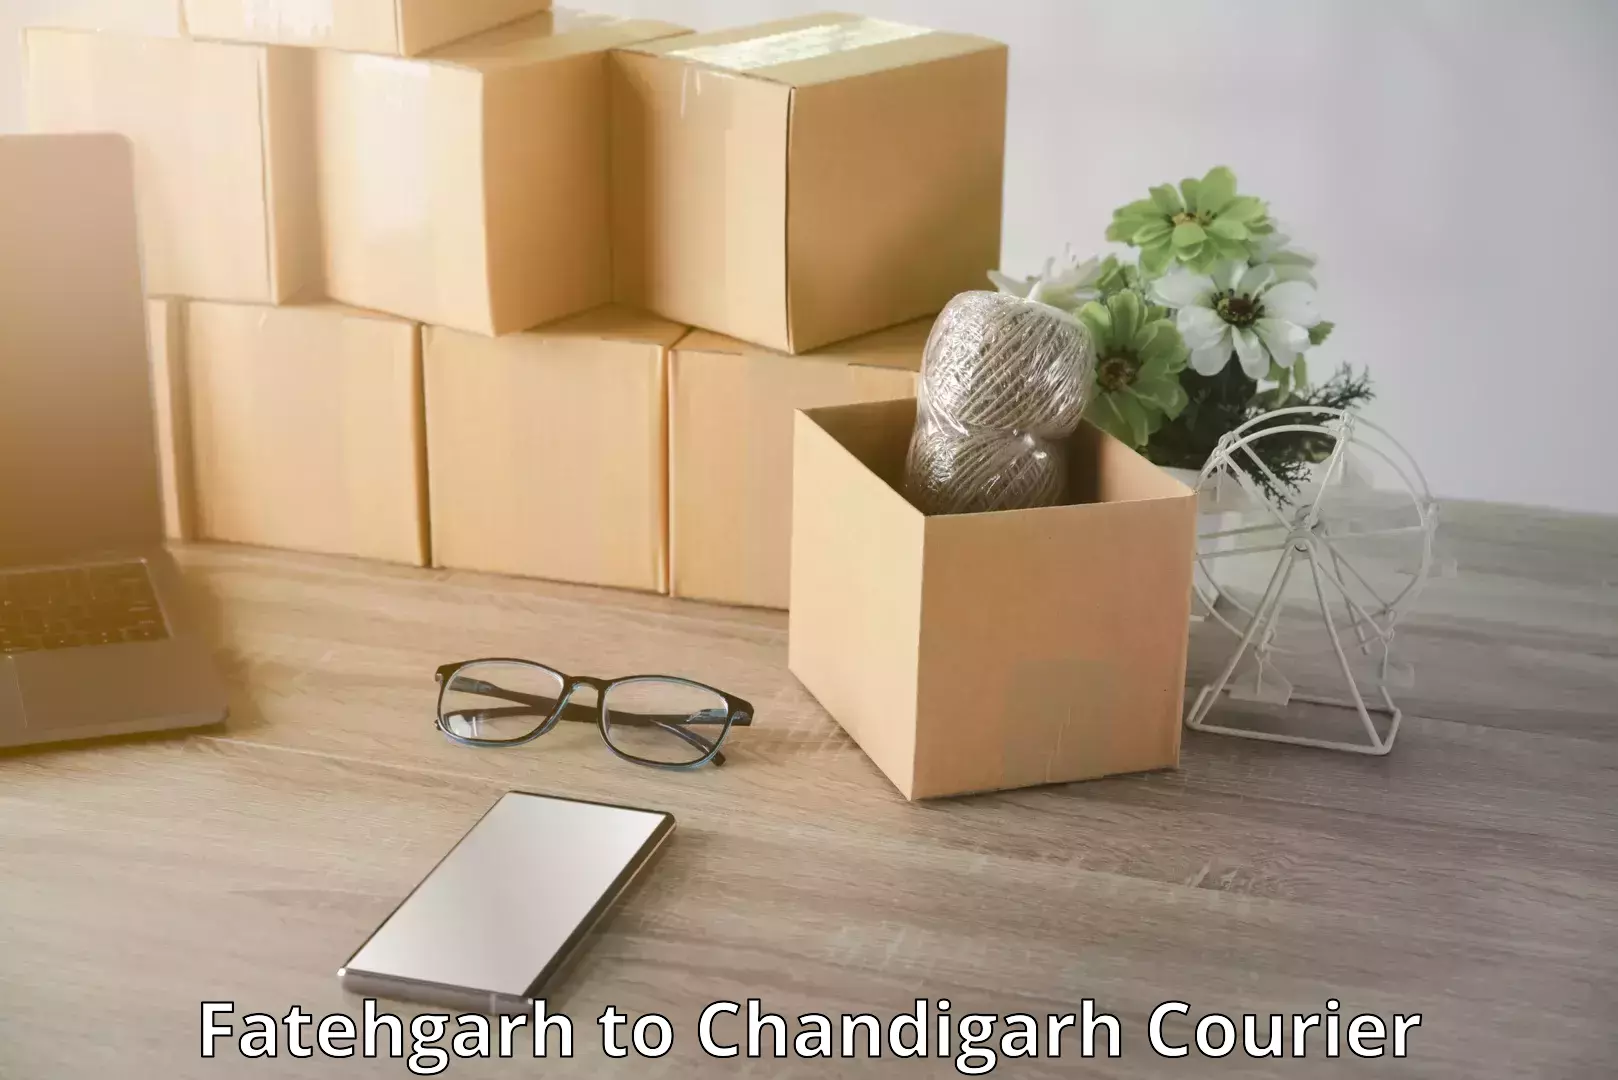 Online luggage shipping booking Fatehgarh to Chandigarh